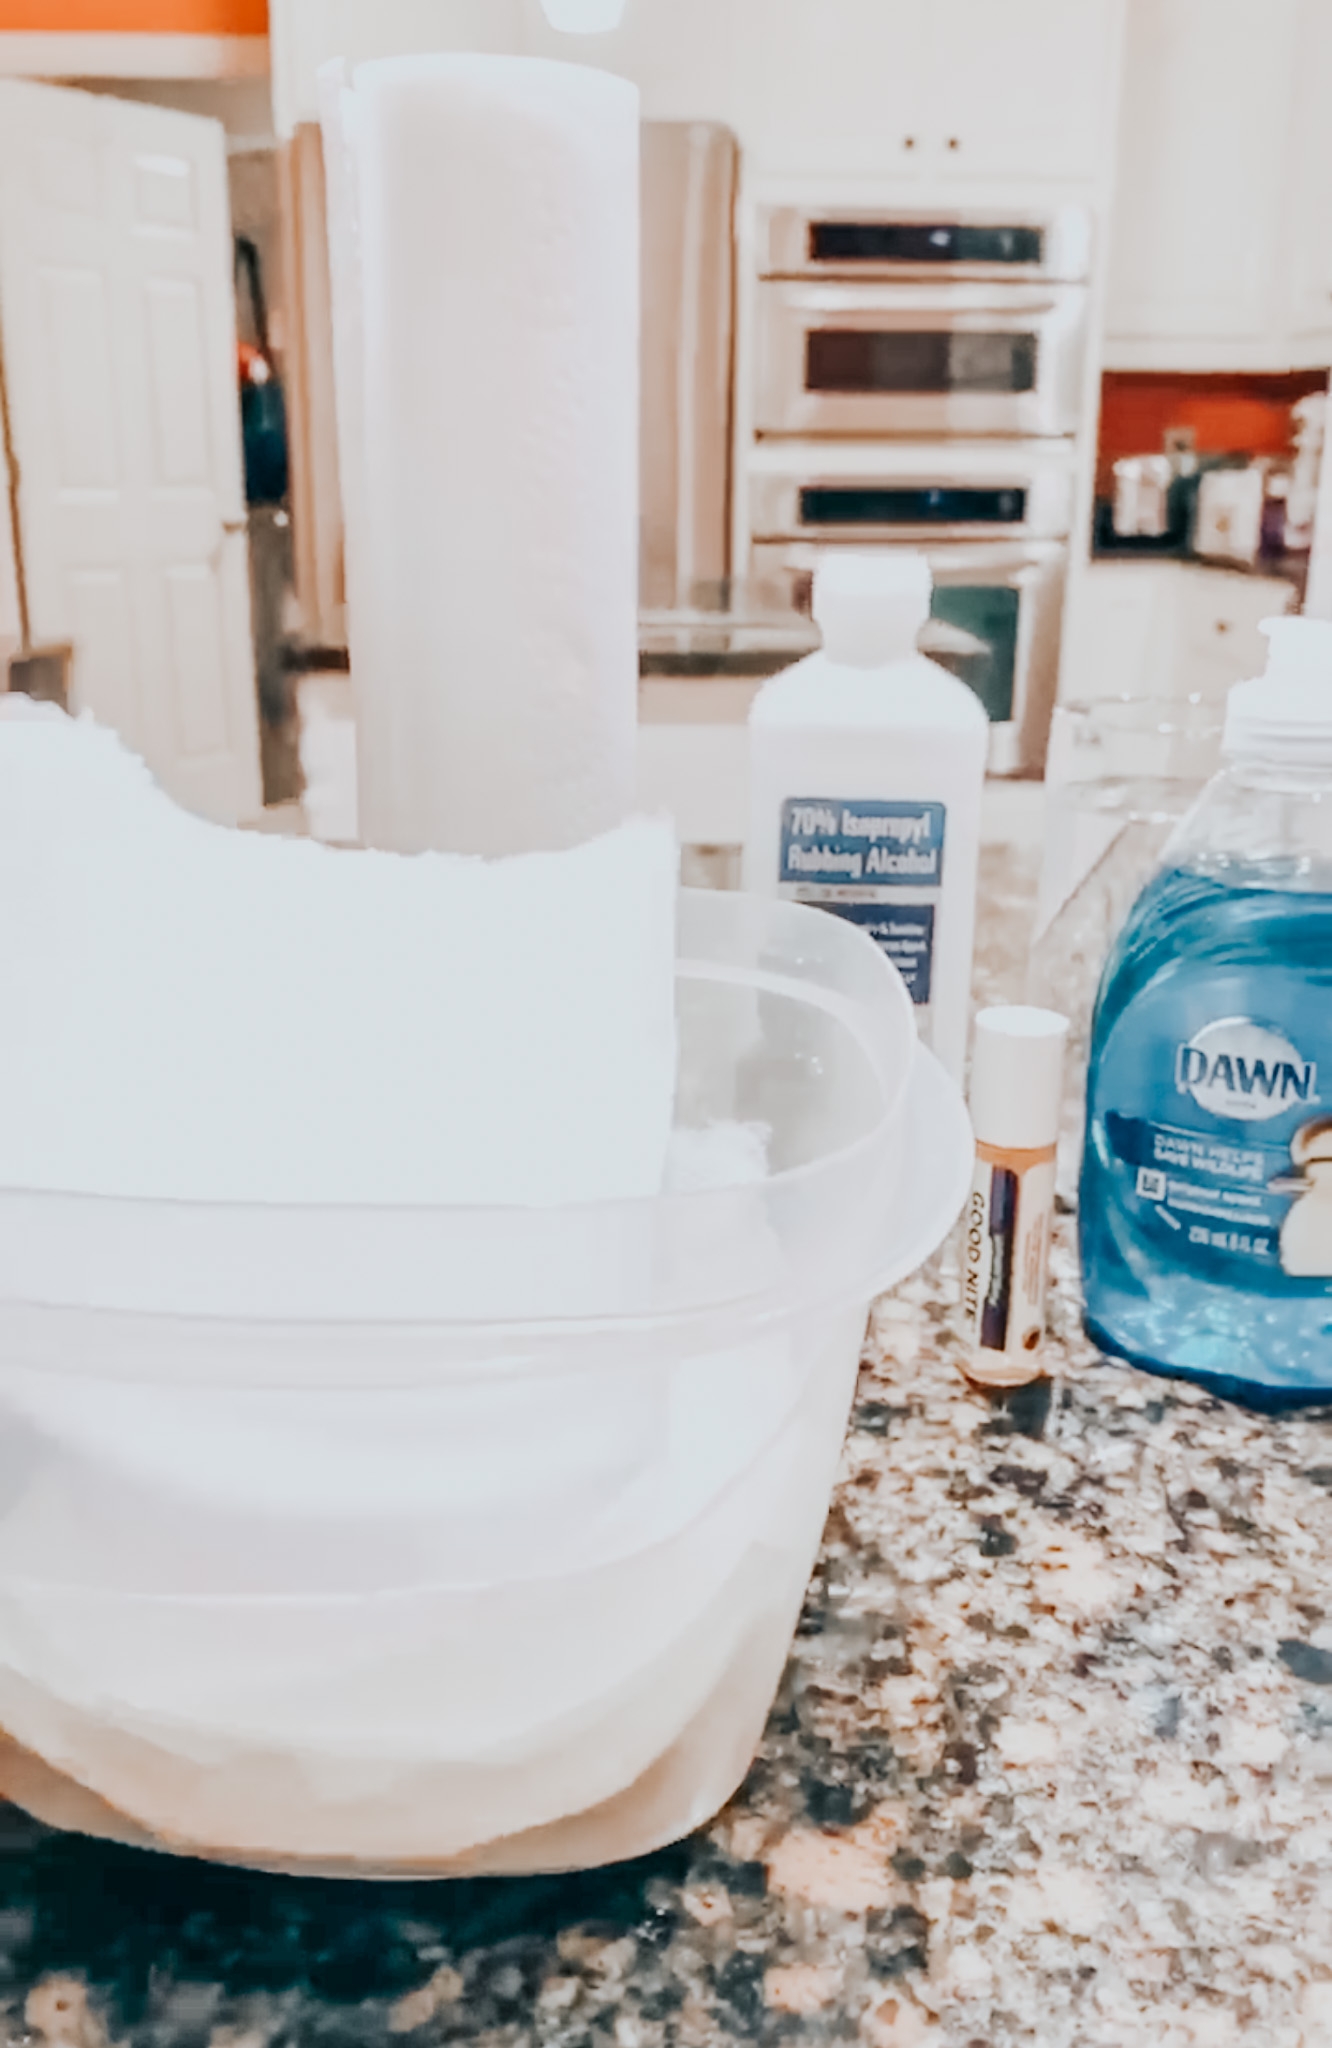 How To Make Homemade Antibacterial Wipes: A Quick Step By Step Tutorial by Alabama Life + Style Blogger, Heather Brown // My Life Well Loved